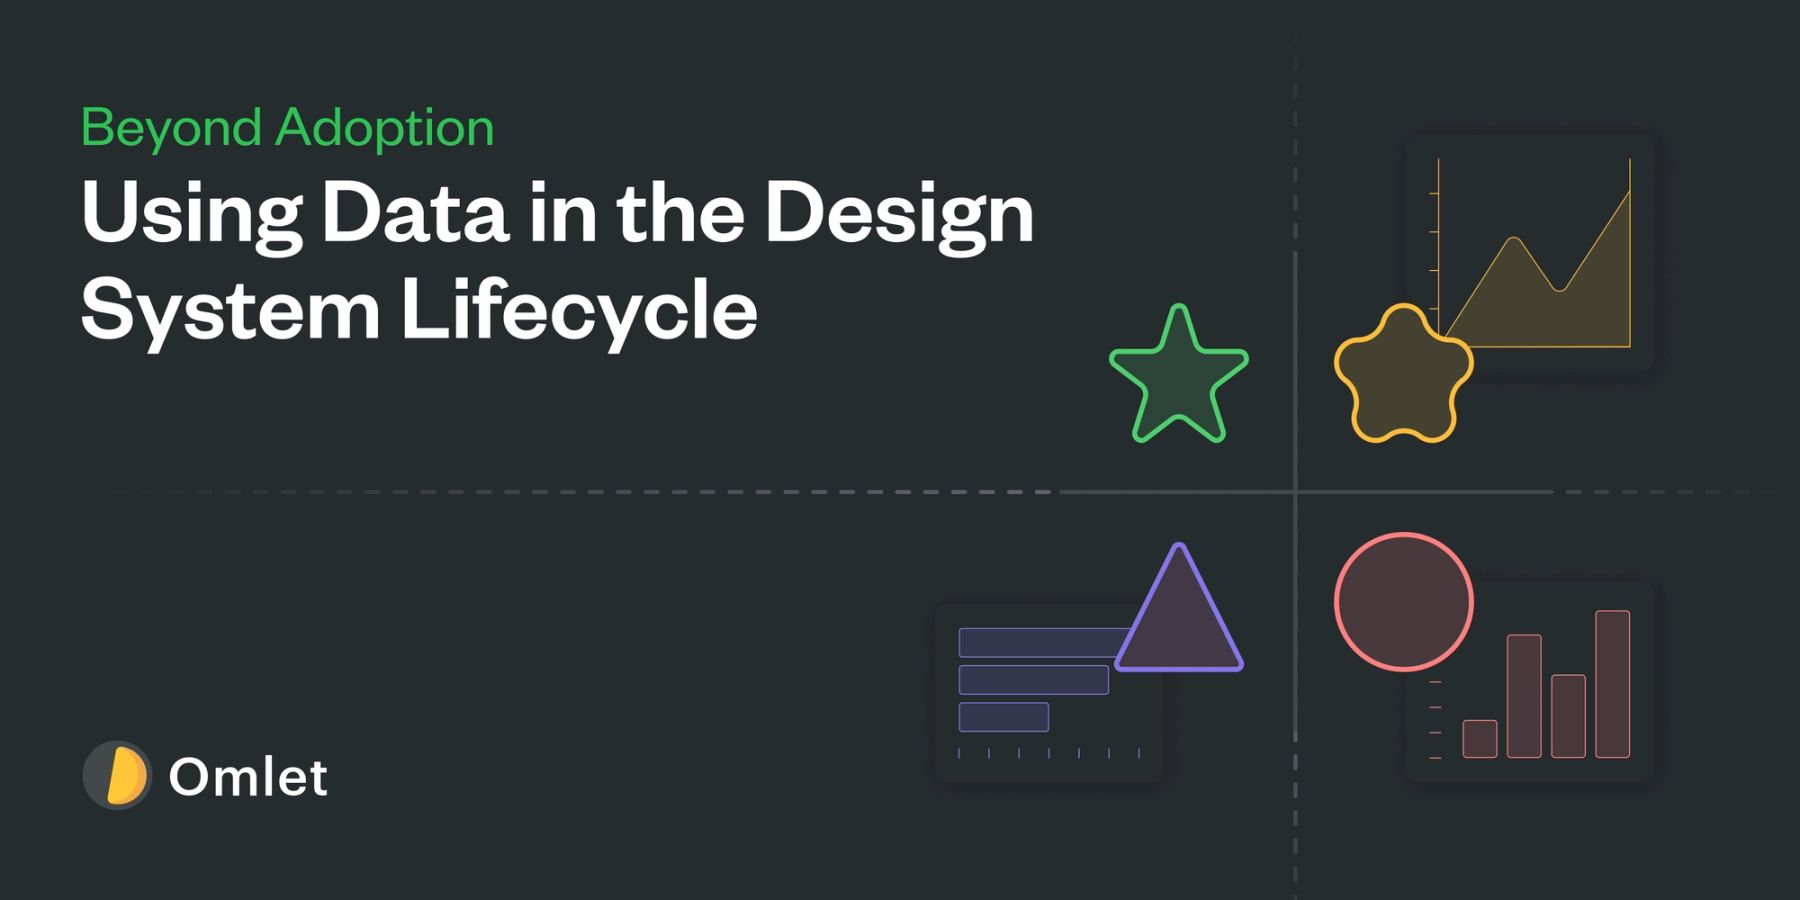  Beyond Adoption — Using Data in the Design System Lifecycle Thumbnail Image